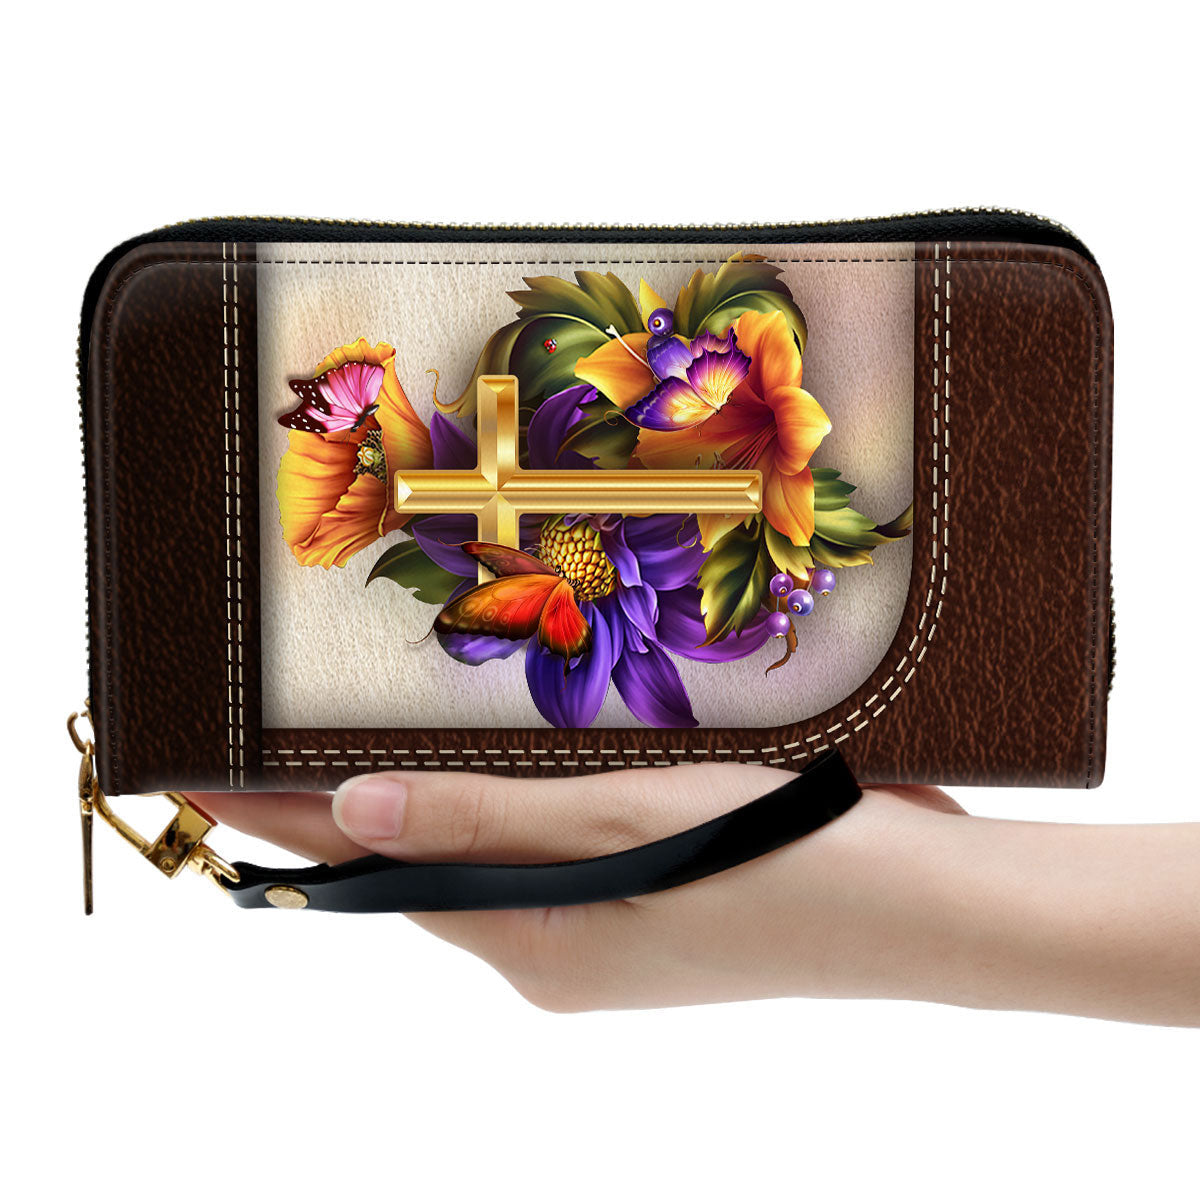 Women Clutch Purse - Inspirational Gifts For Christian Mom Through Your Life, I’ve Found His Grace Personalized Zippered Leather Clutch Purse